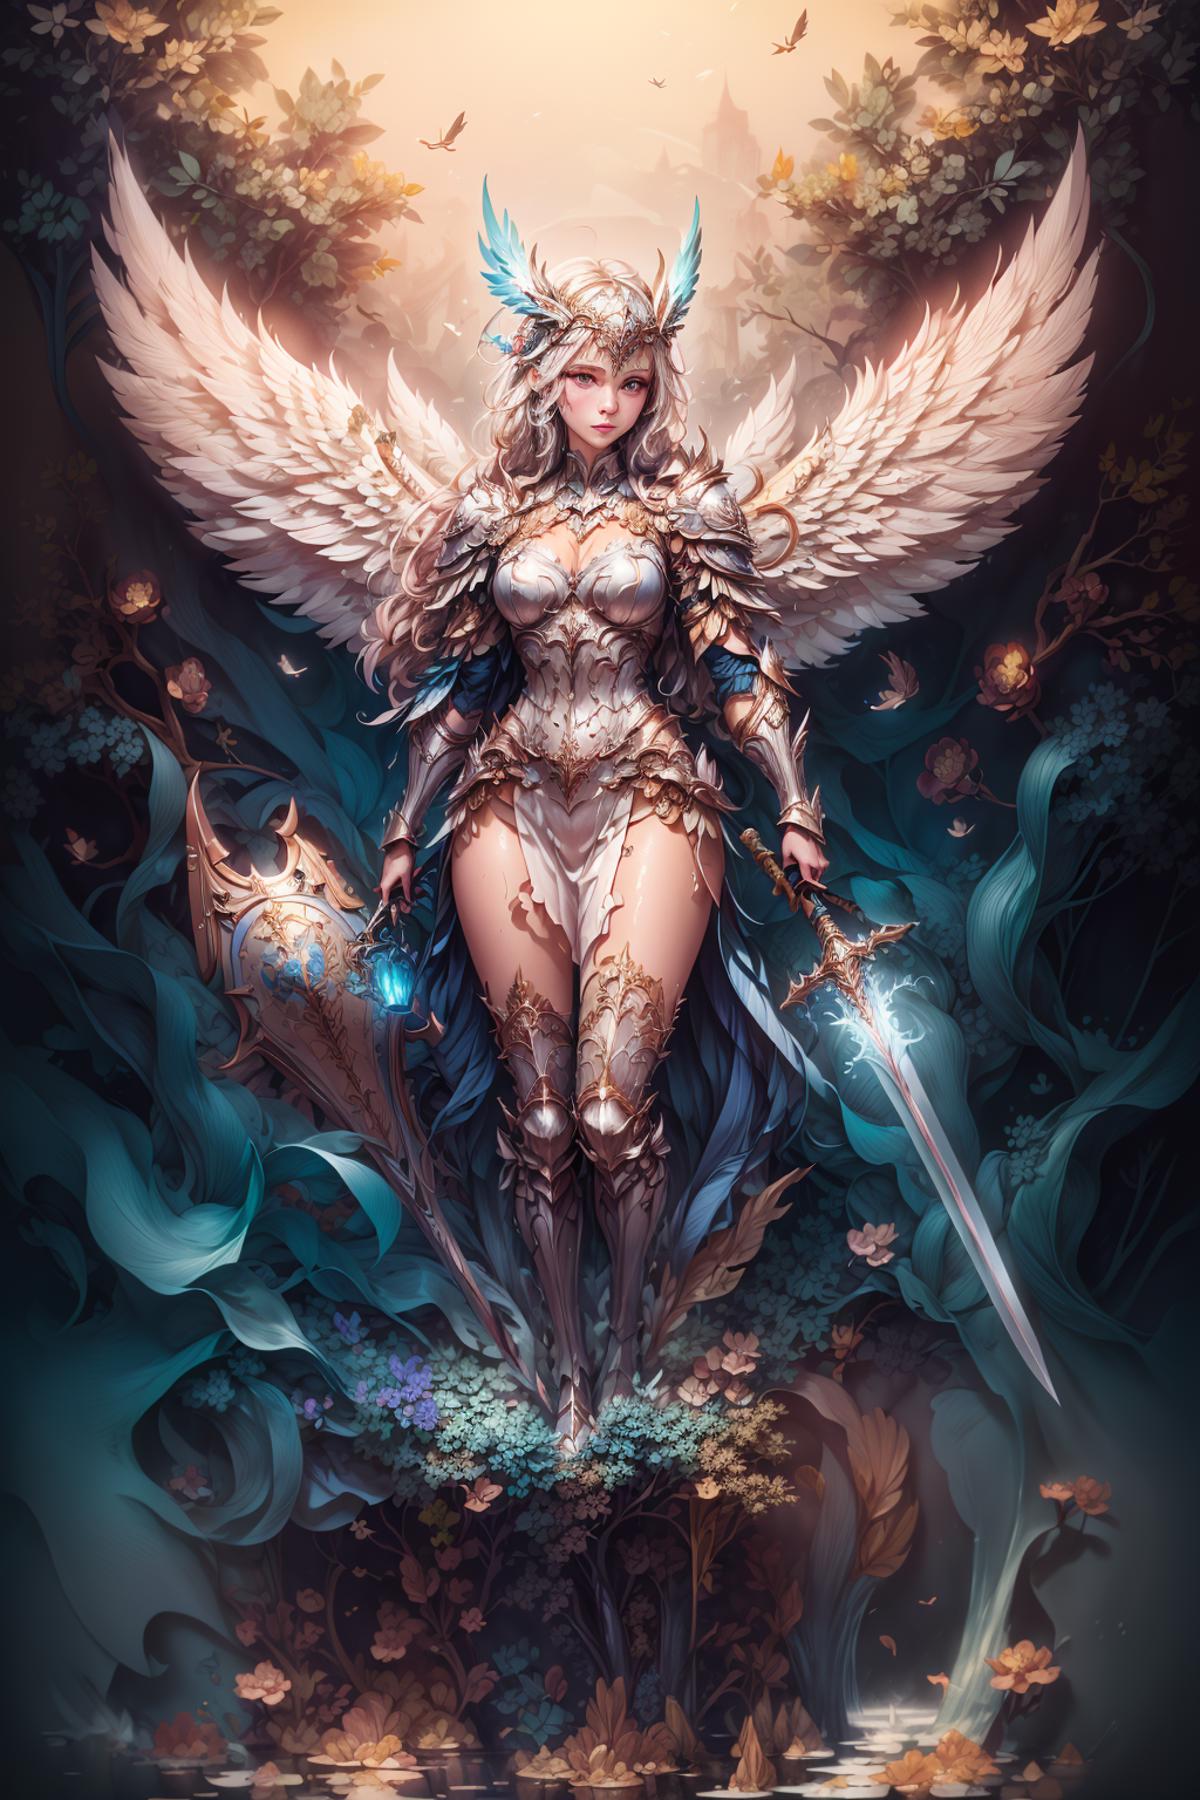 Angelic Wairrors (Valkyrie, Paladin, Priestess) image by ChaosOrchestrator